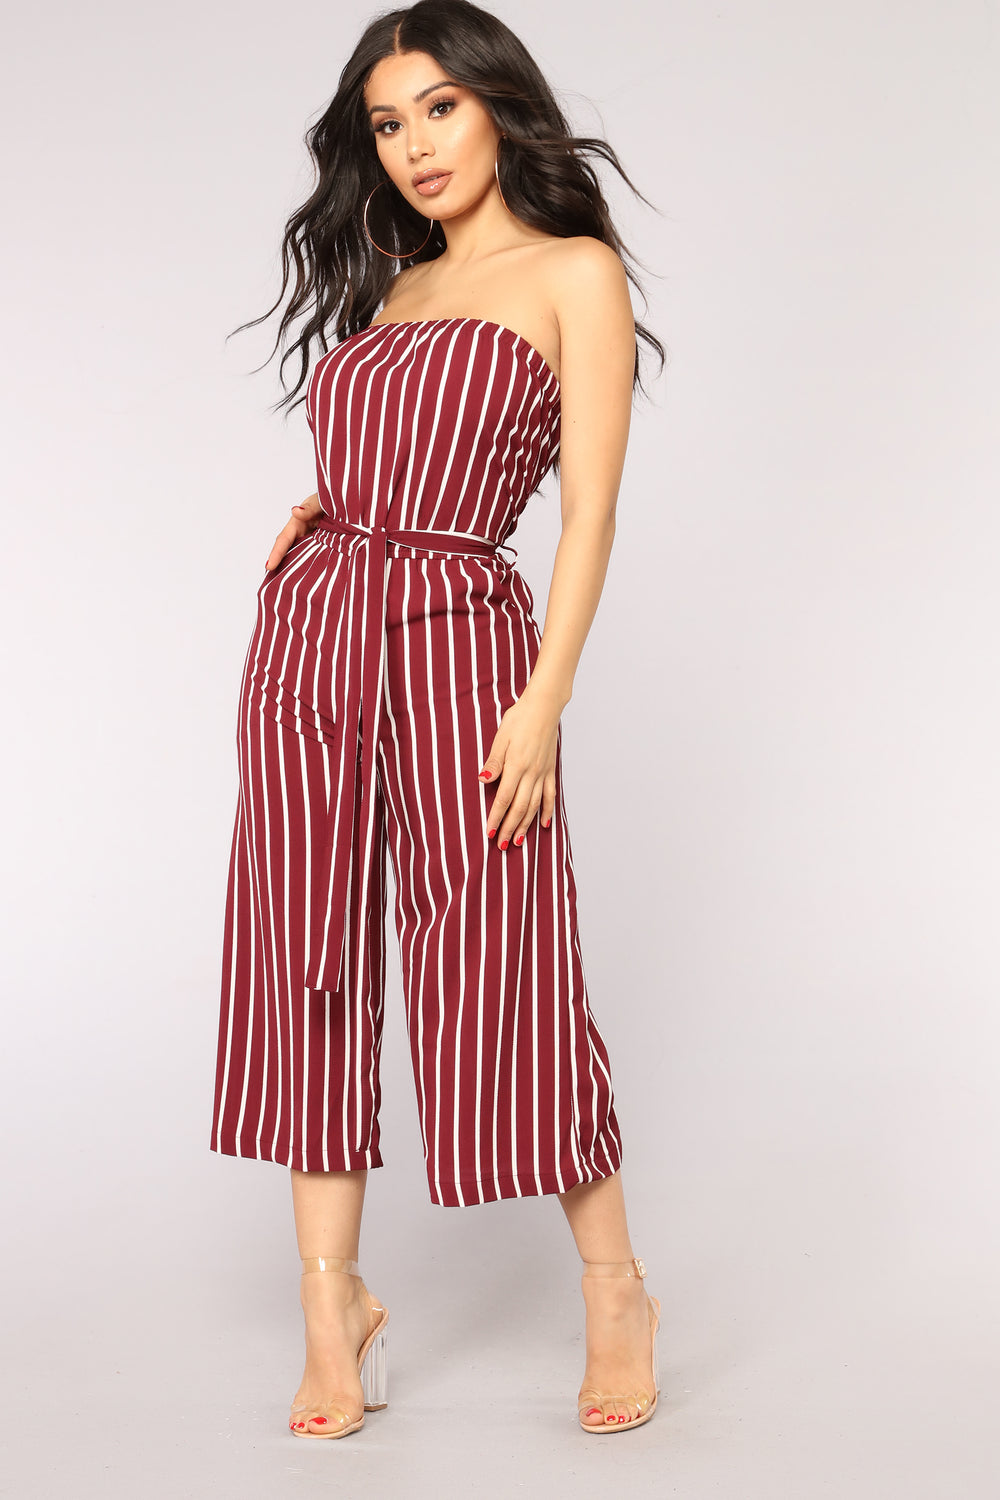 Across The Pond Striped Jumpsuit - Burgundy/White